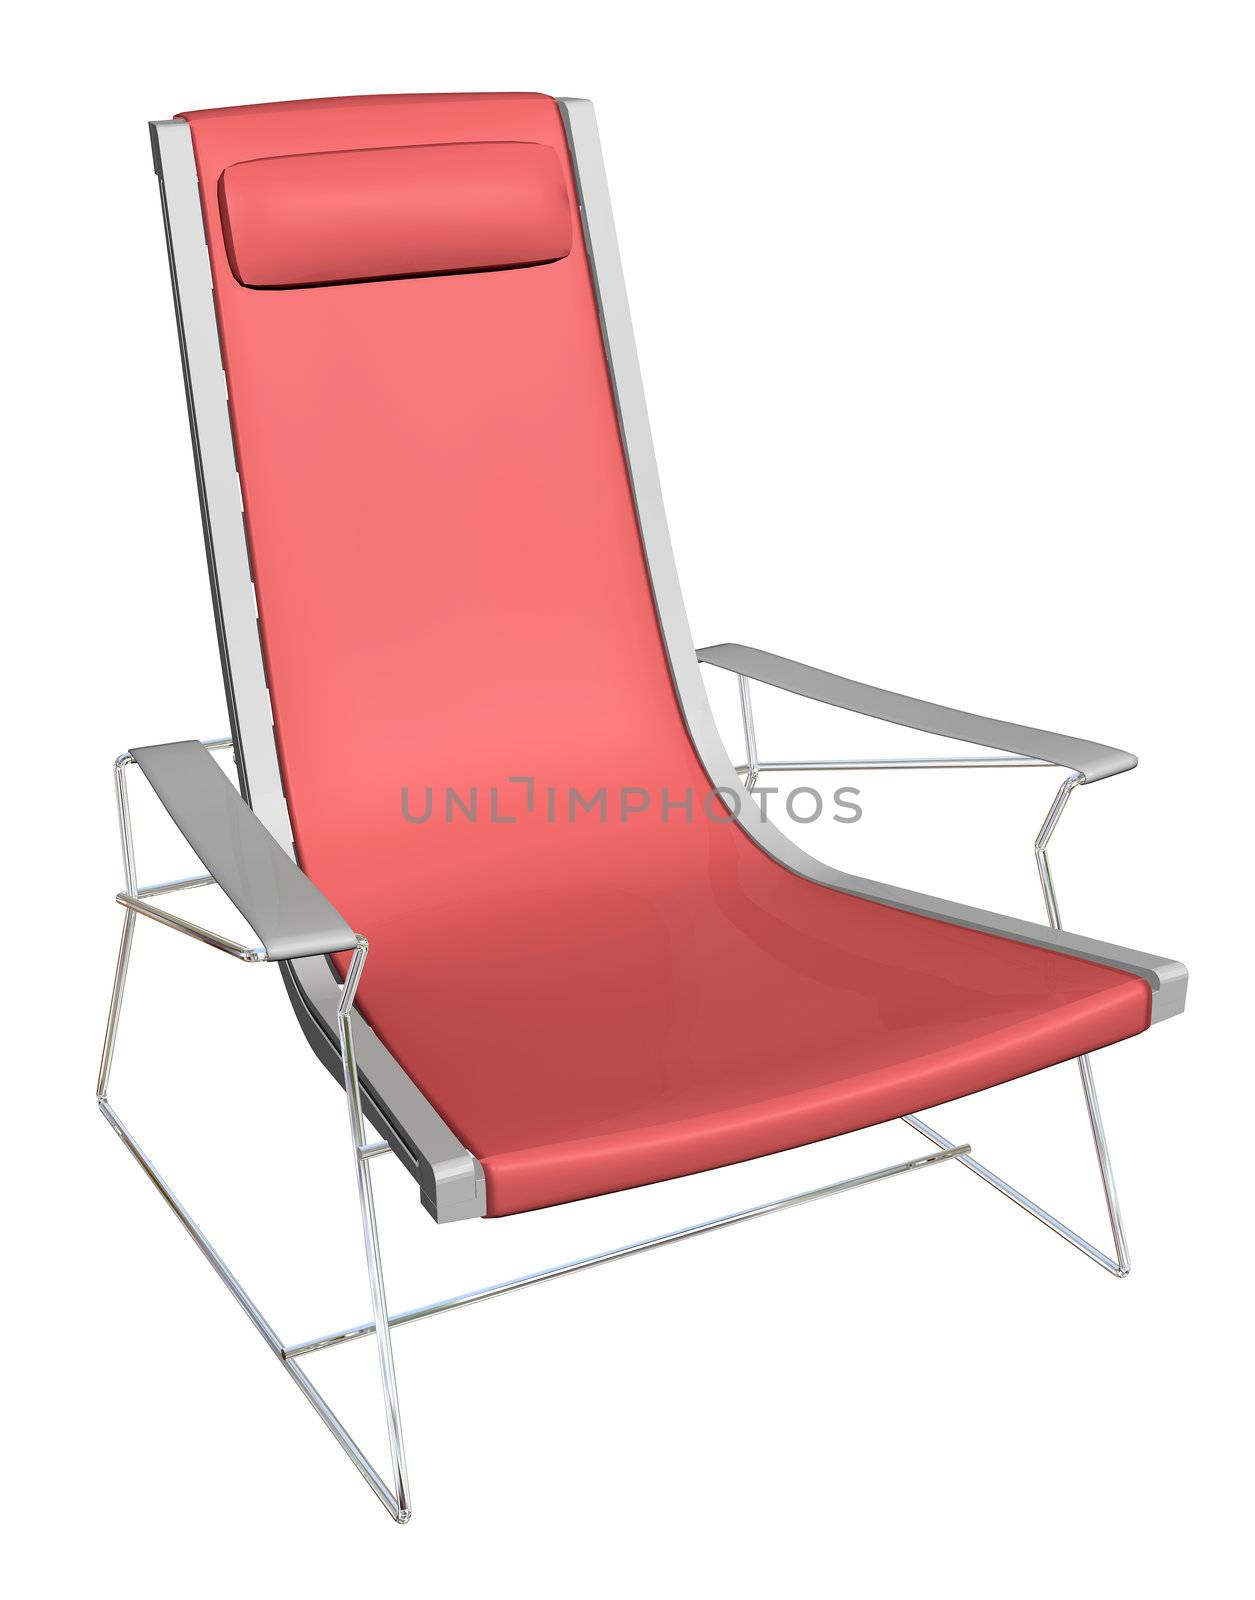 Plastic lounge chair, red, metal frame, with headrest armrest,  3D illustration, isolated against a white background.